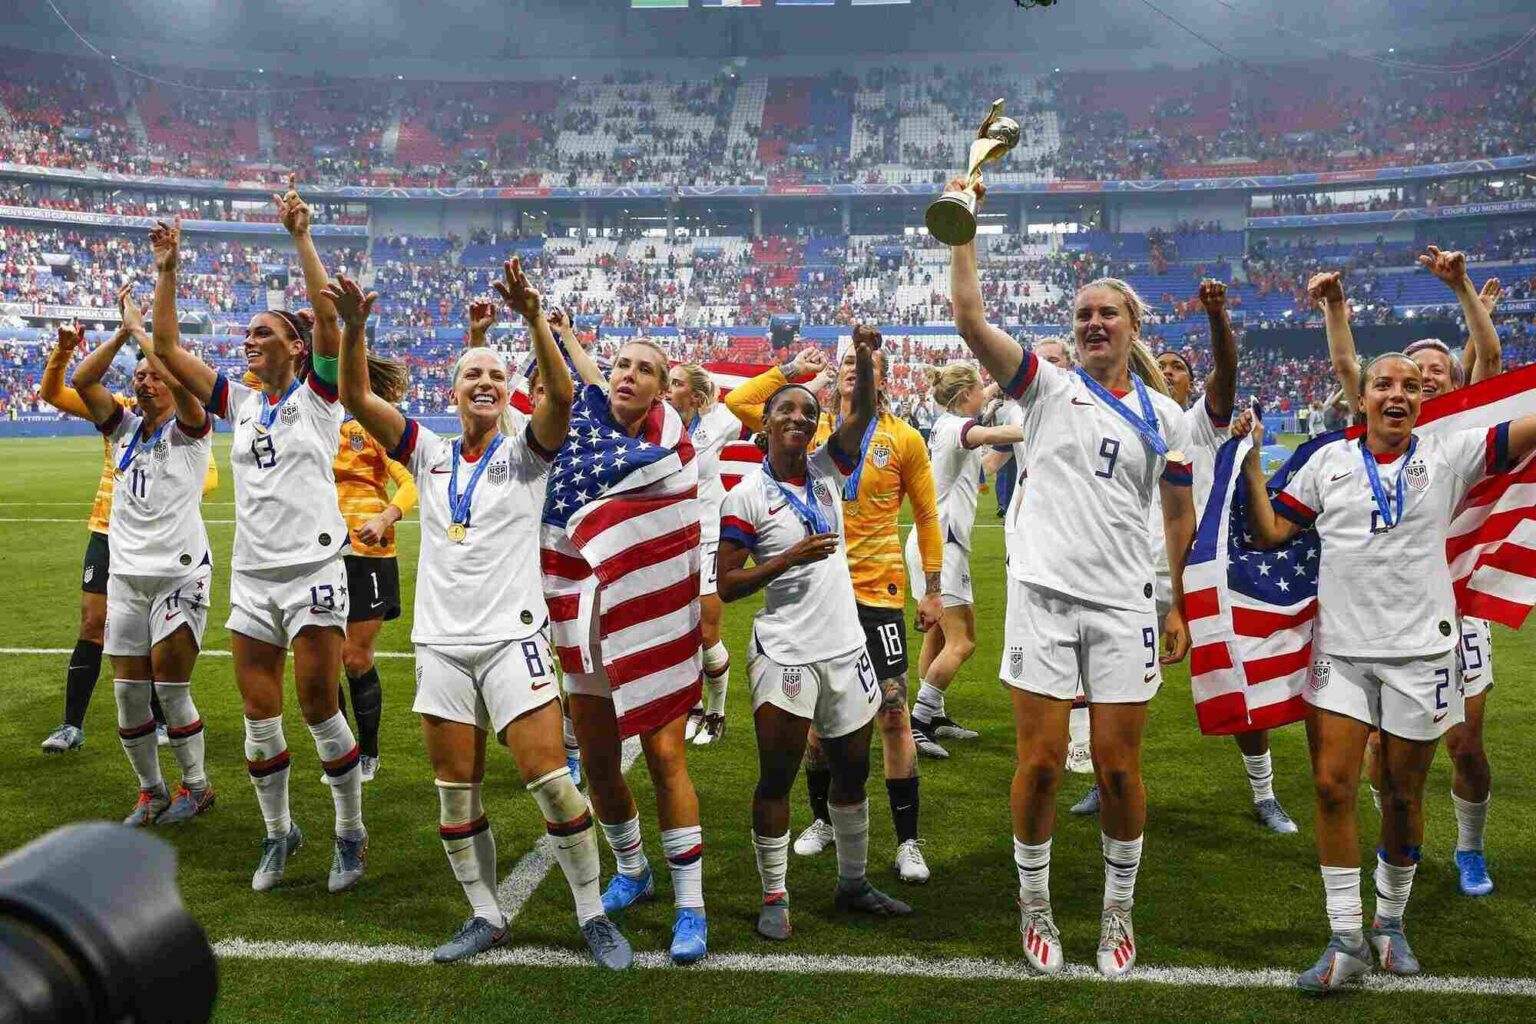 The US Women's Soccer team recently scored a court victory for equality in accommodations. Why is equal pay still an issue?